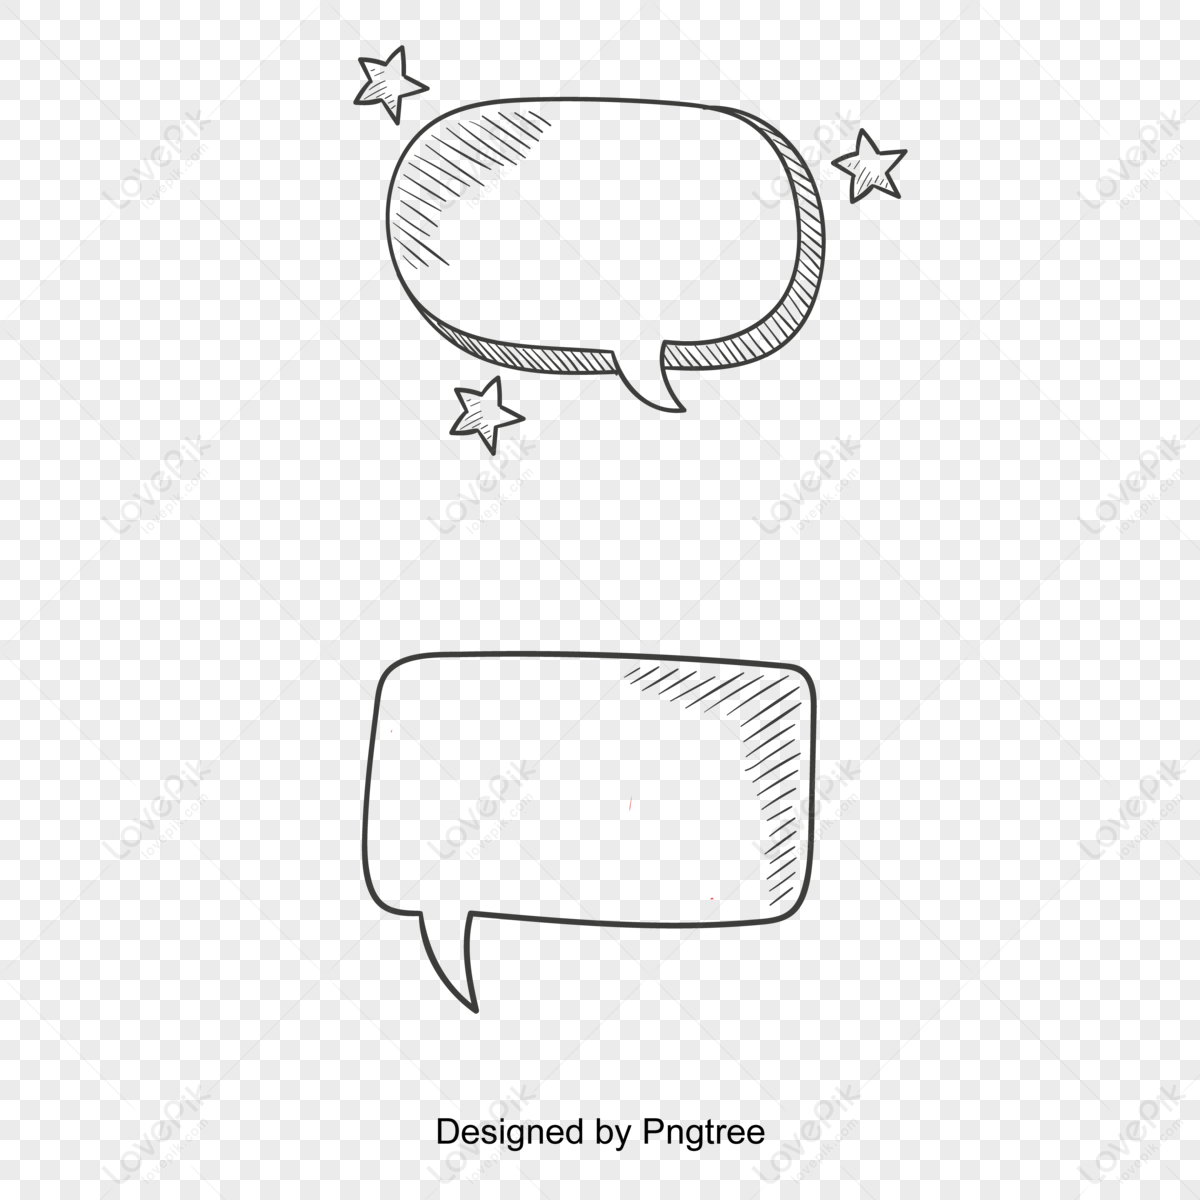 Simple gift boxes drawing the hand various style. Hand gives a gift box on  a white background. Black color line pattern simple design. Cartoon style.  Top view. Vector illustration. Stock Vector |